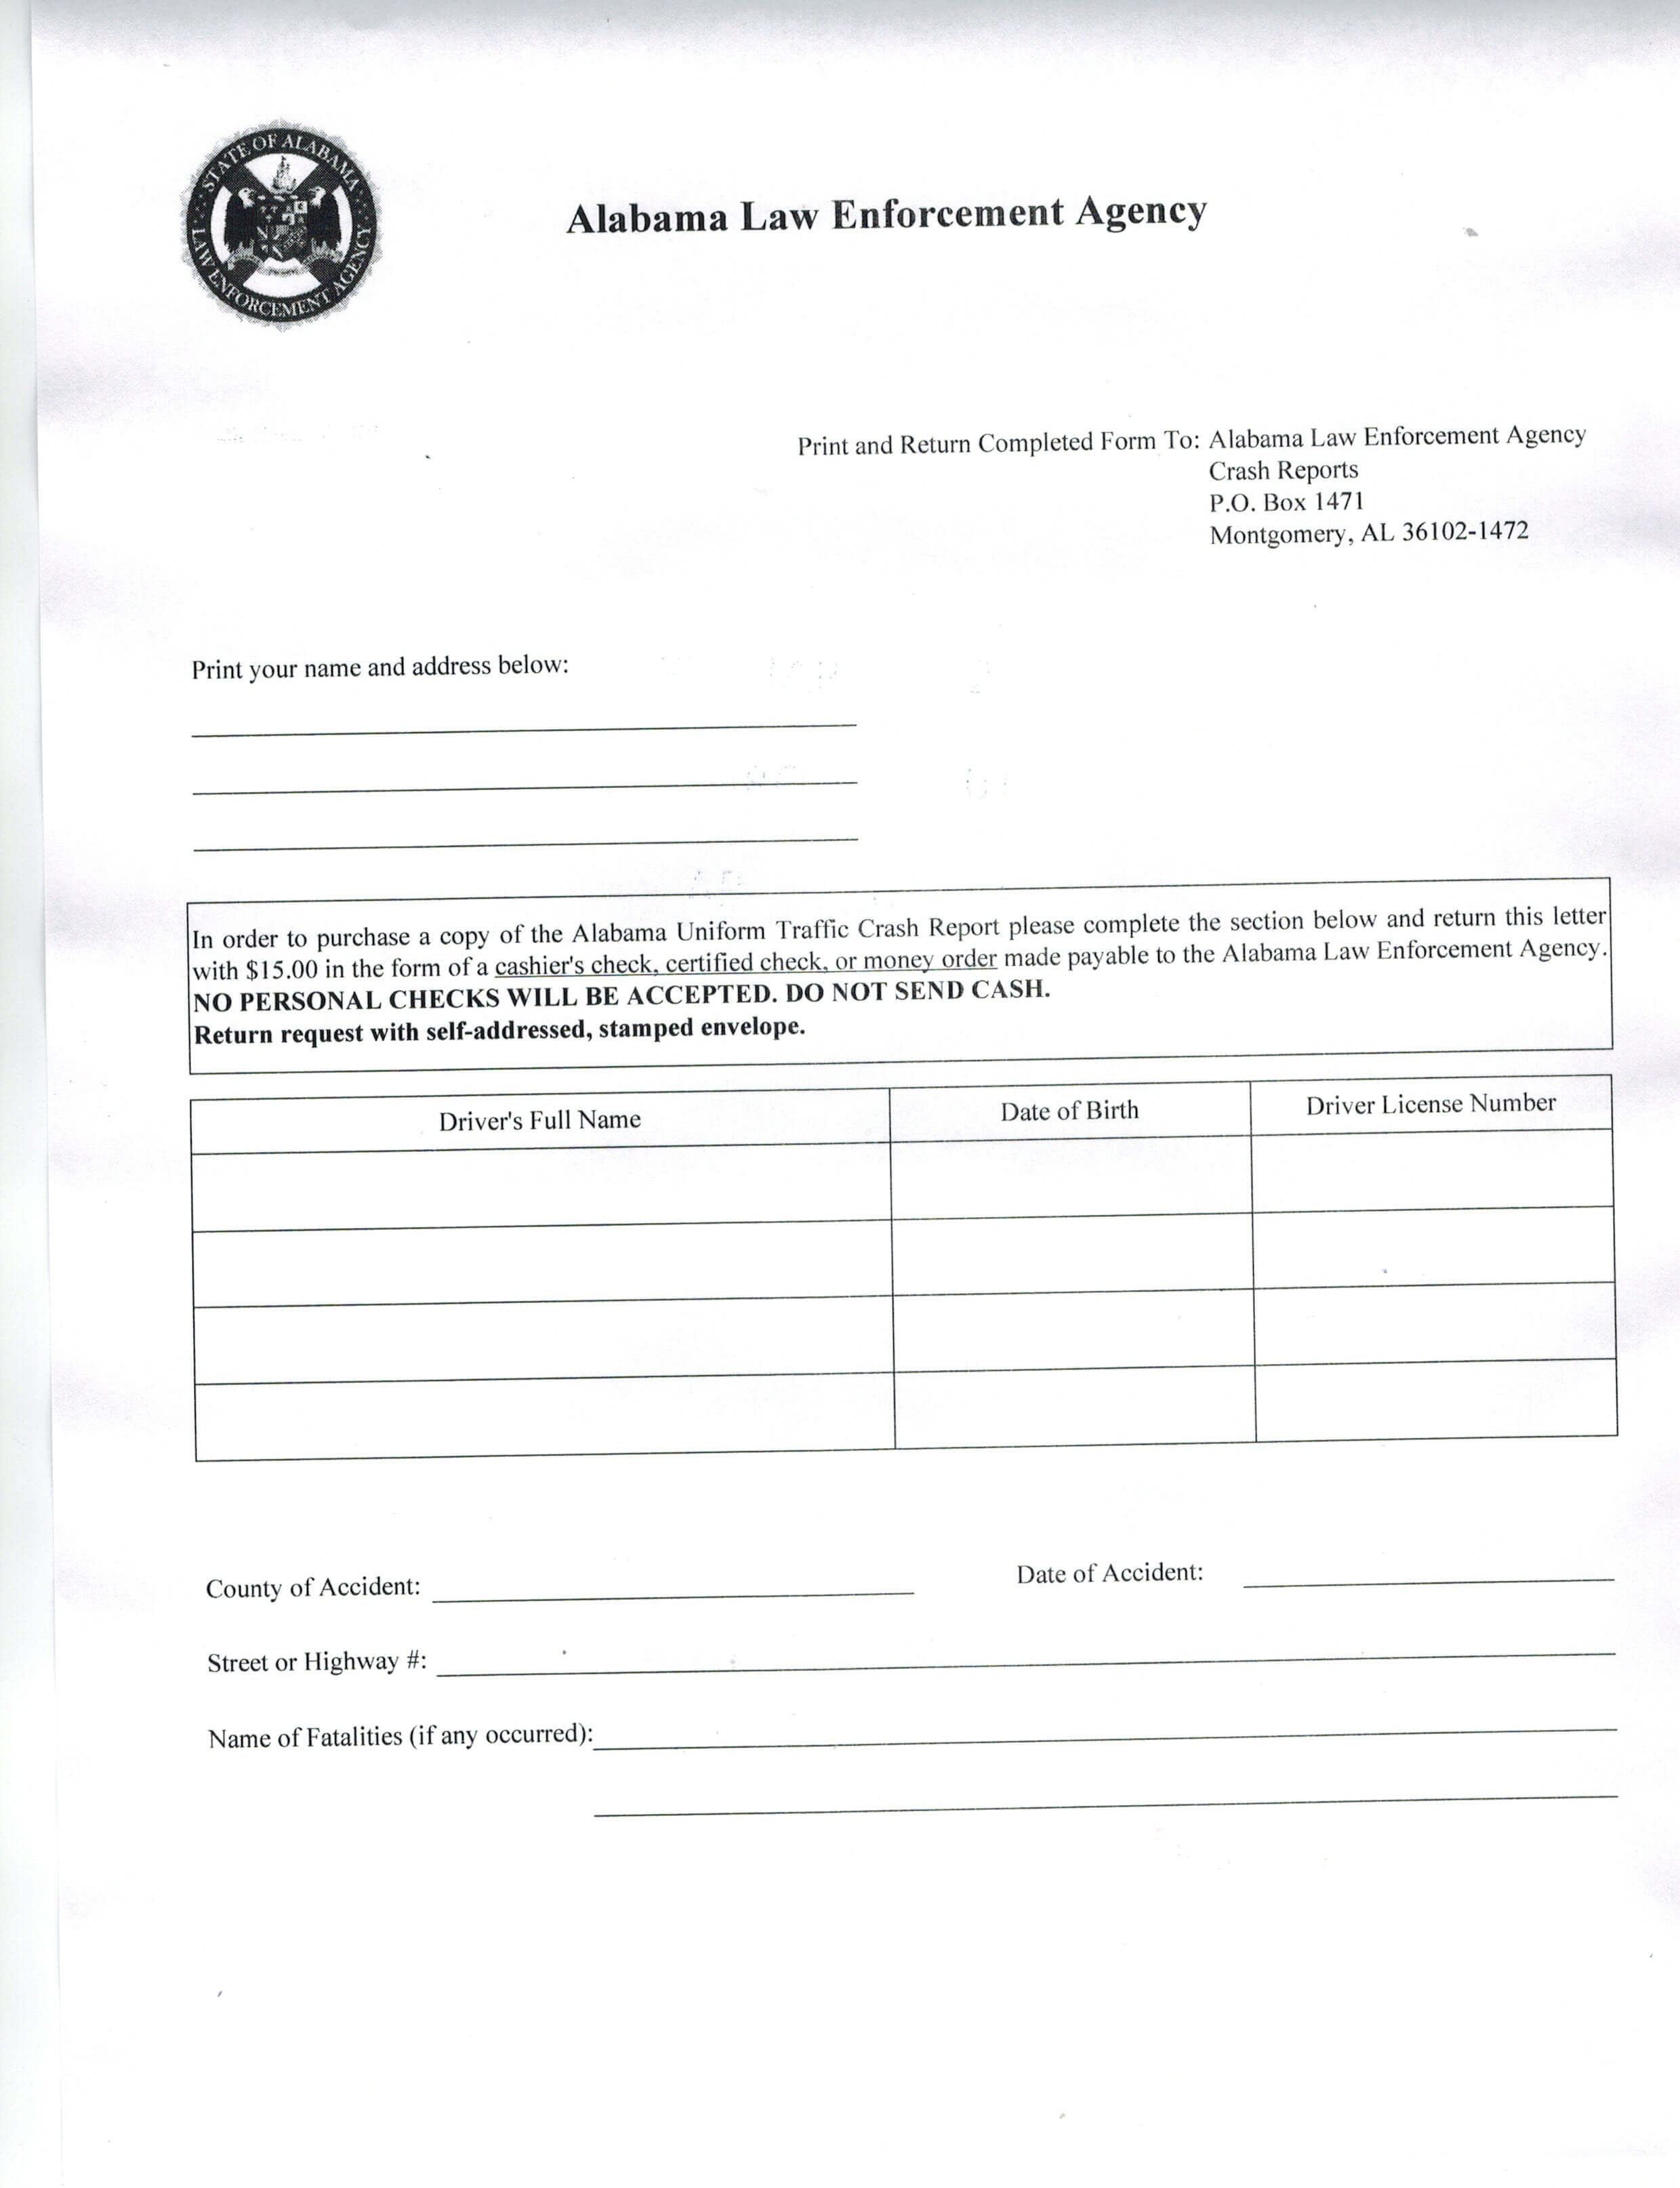 Vehicle Accident Report Format Car Sample Pdf Free Form In Motor Vehicle Accident Report Form Template